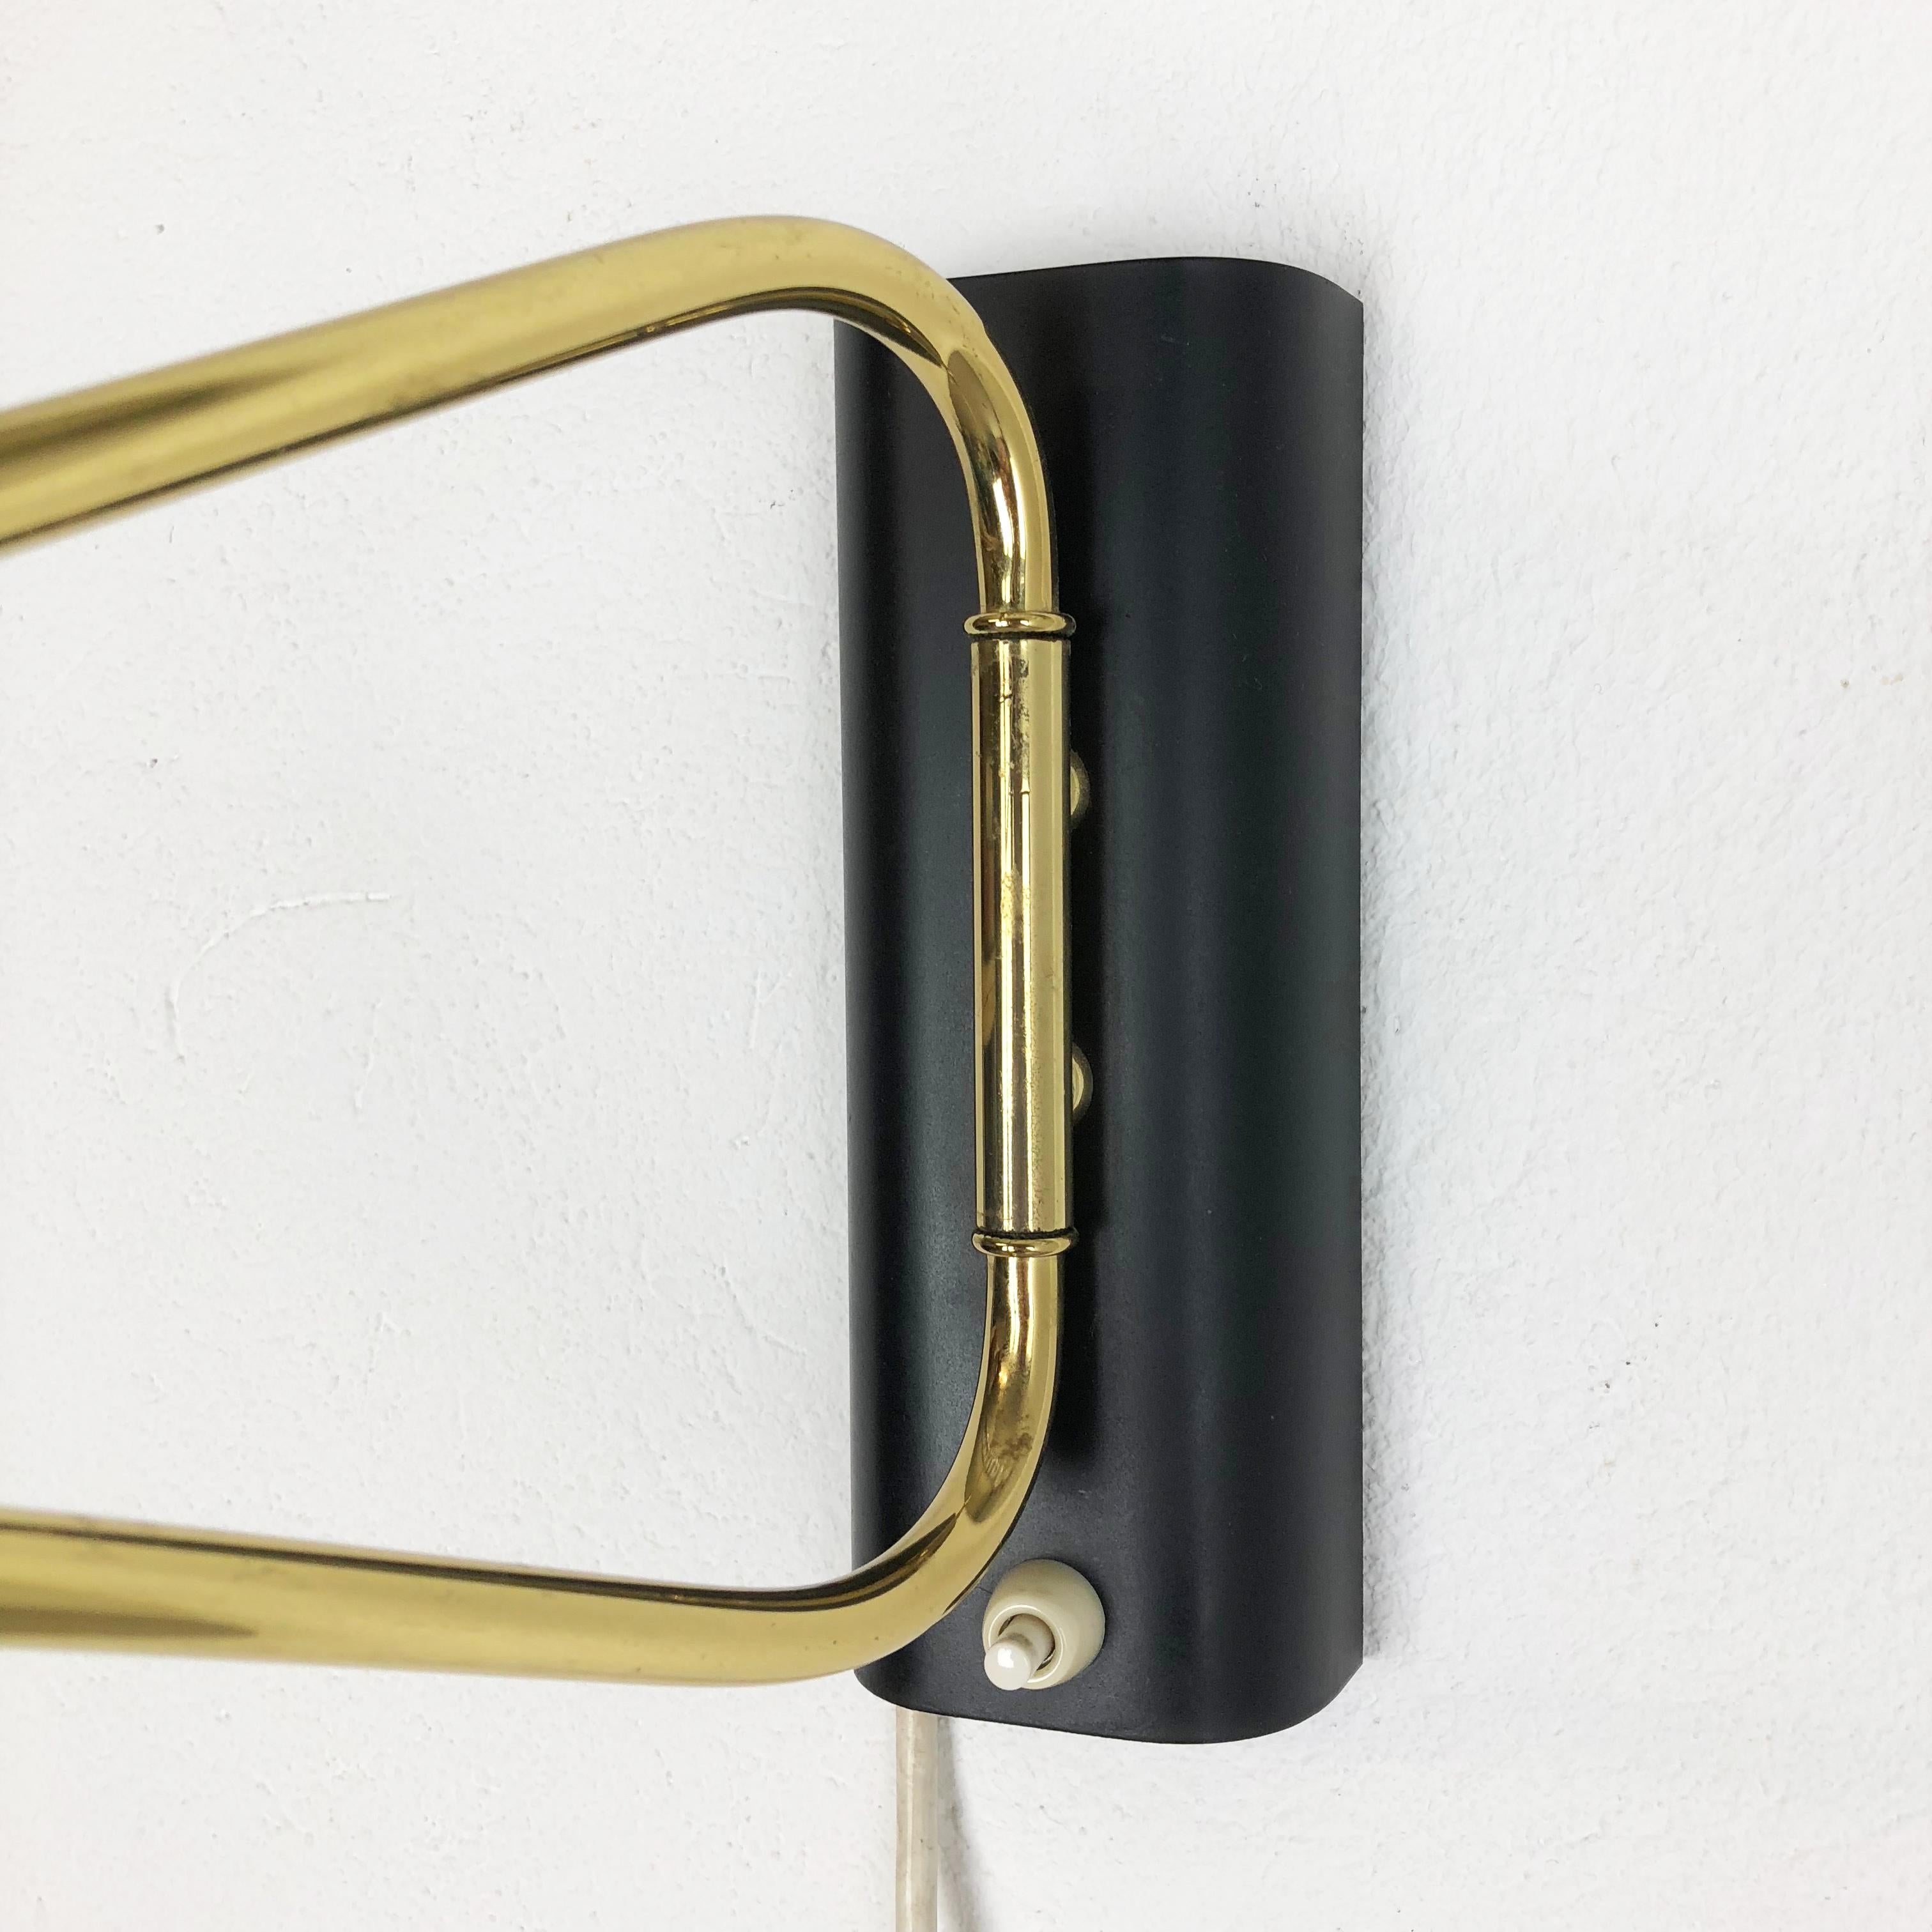 Original Modernist 1950s Brass Metal Swing Wall Light Made by Cosack, Germany 1